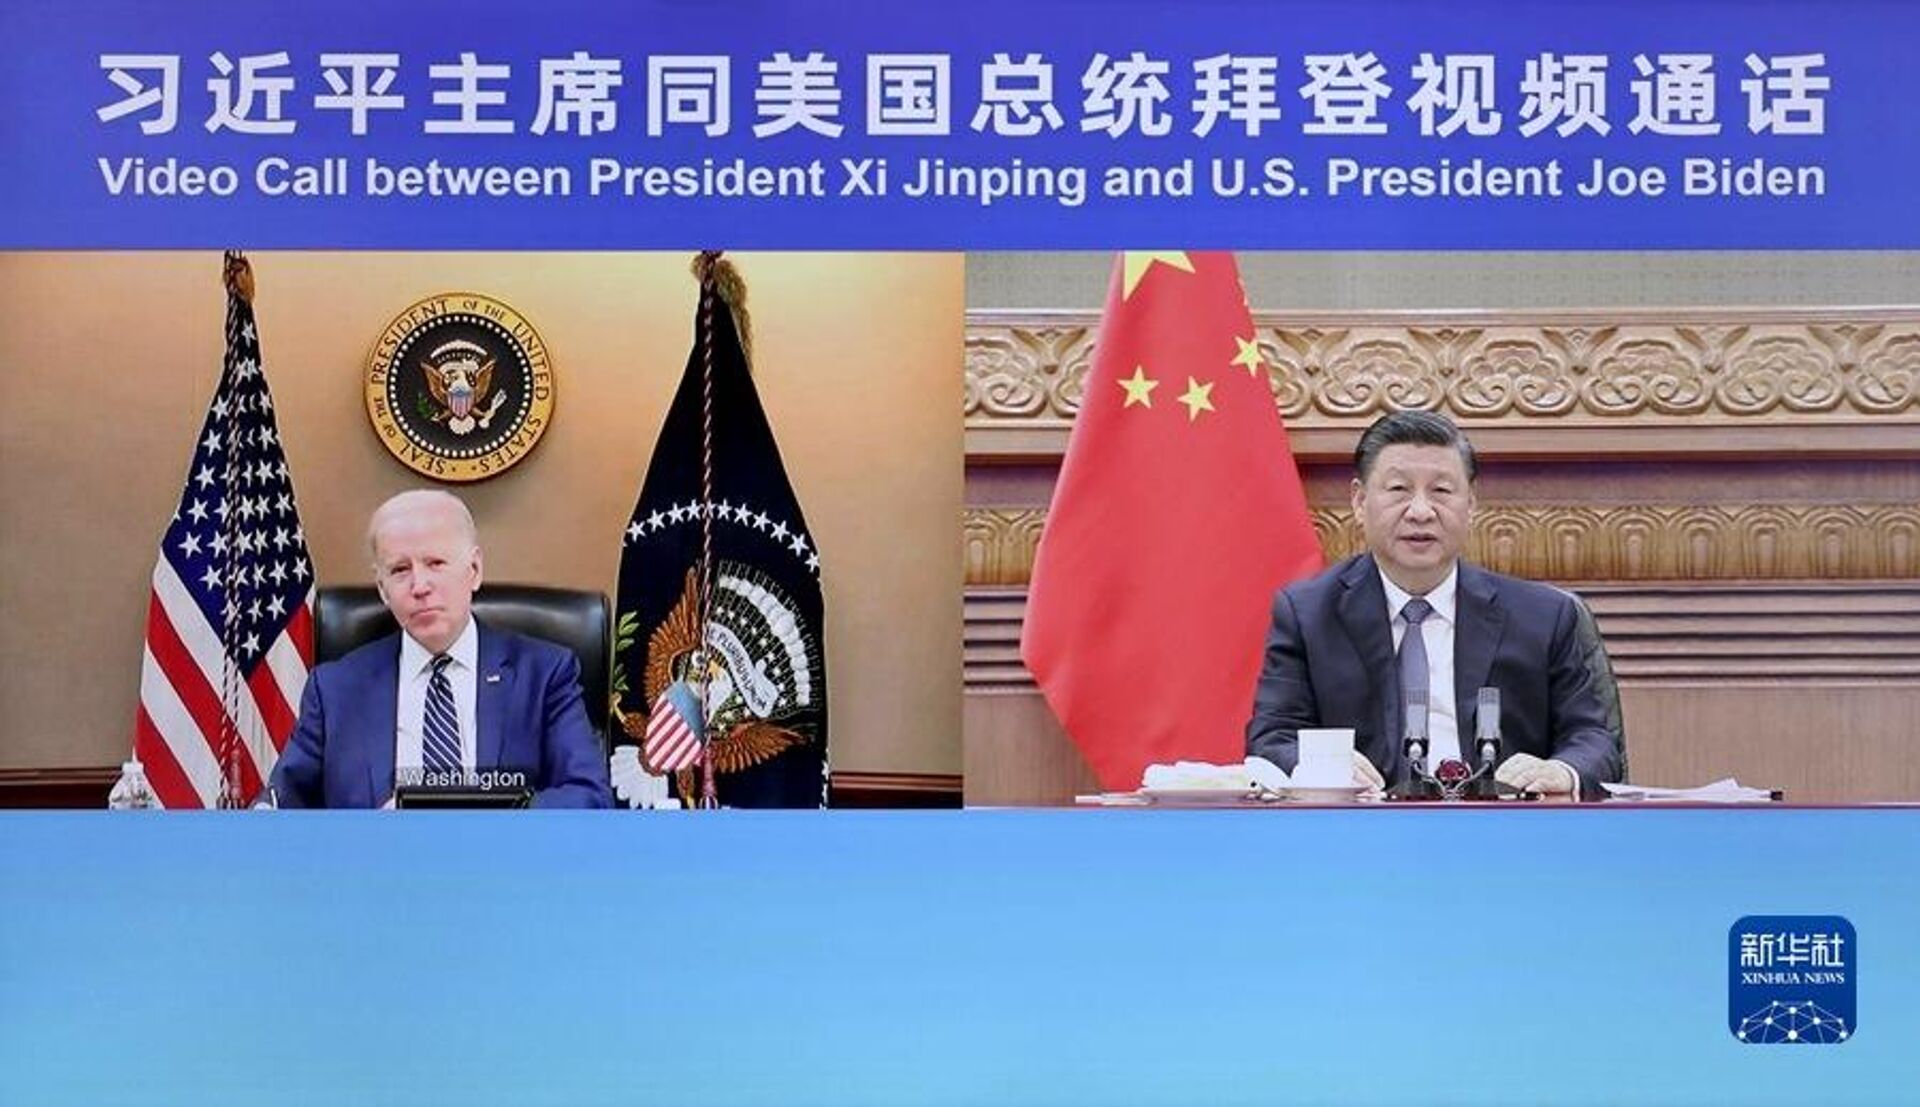 A video call between presidents Joe Biden and Xi Jinping on the Russia-Ukraine situation and bilateral issues took place on March 18, 2022 - Sputnik Brasil, 1920, 28.12.2022